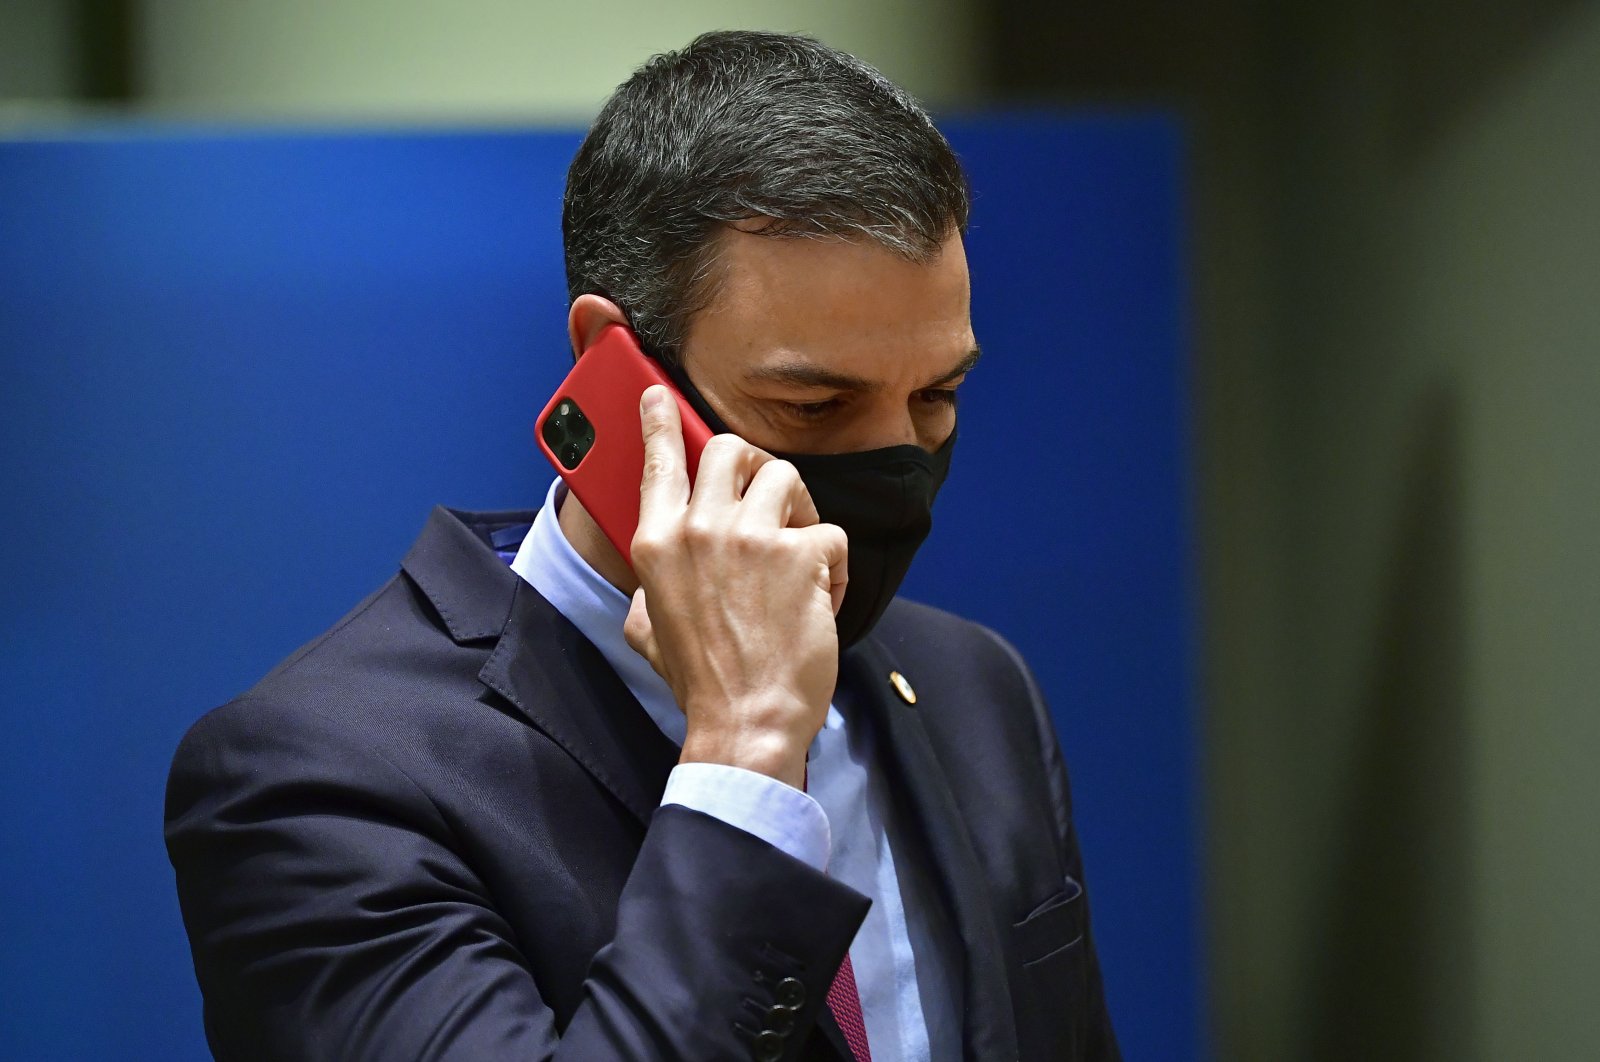 Spain&#039;s Prime Minister Pedro Sanchez speaks on his cell phone during a round table meeting at an EU summit in Brussels, Belgium, July 20, 2020. (AP)